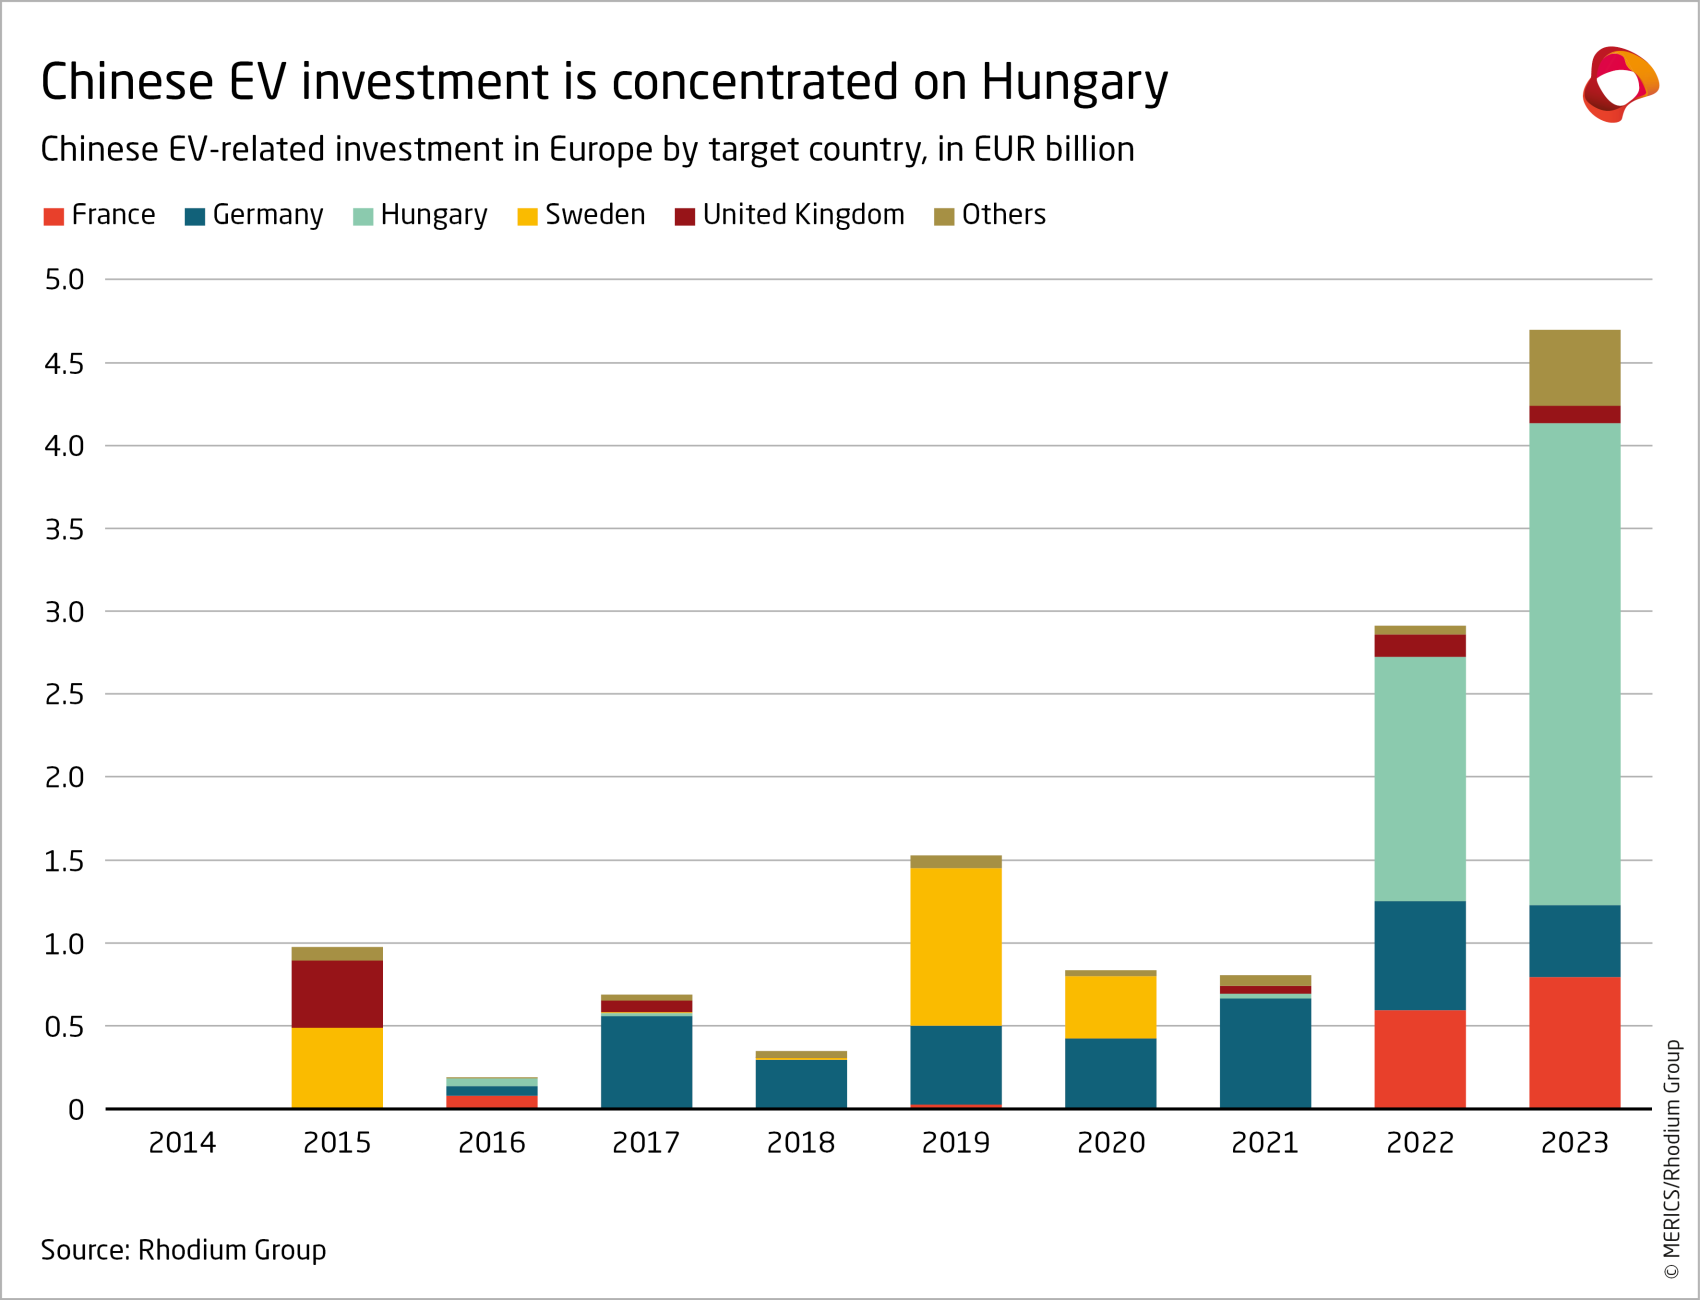 merics-rhodium-group-chinese-fdi-in-europe-2023-chinese-ev-investment-is-concentrated-on-hungary-exhibit-7.png